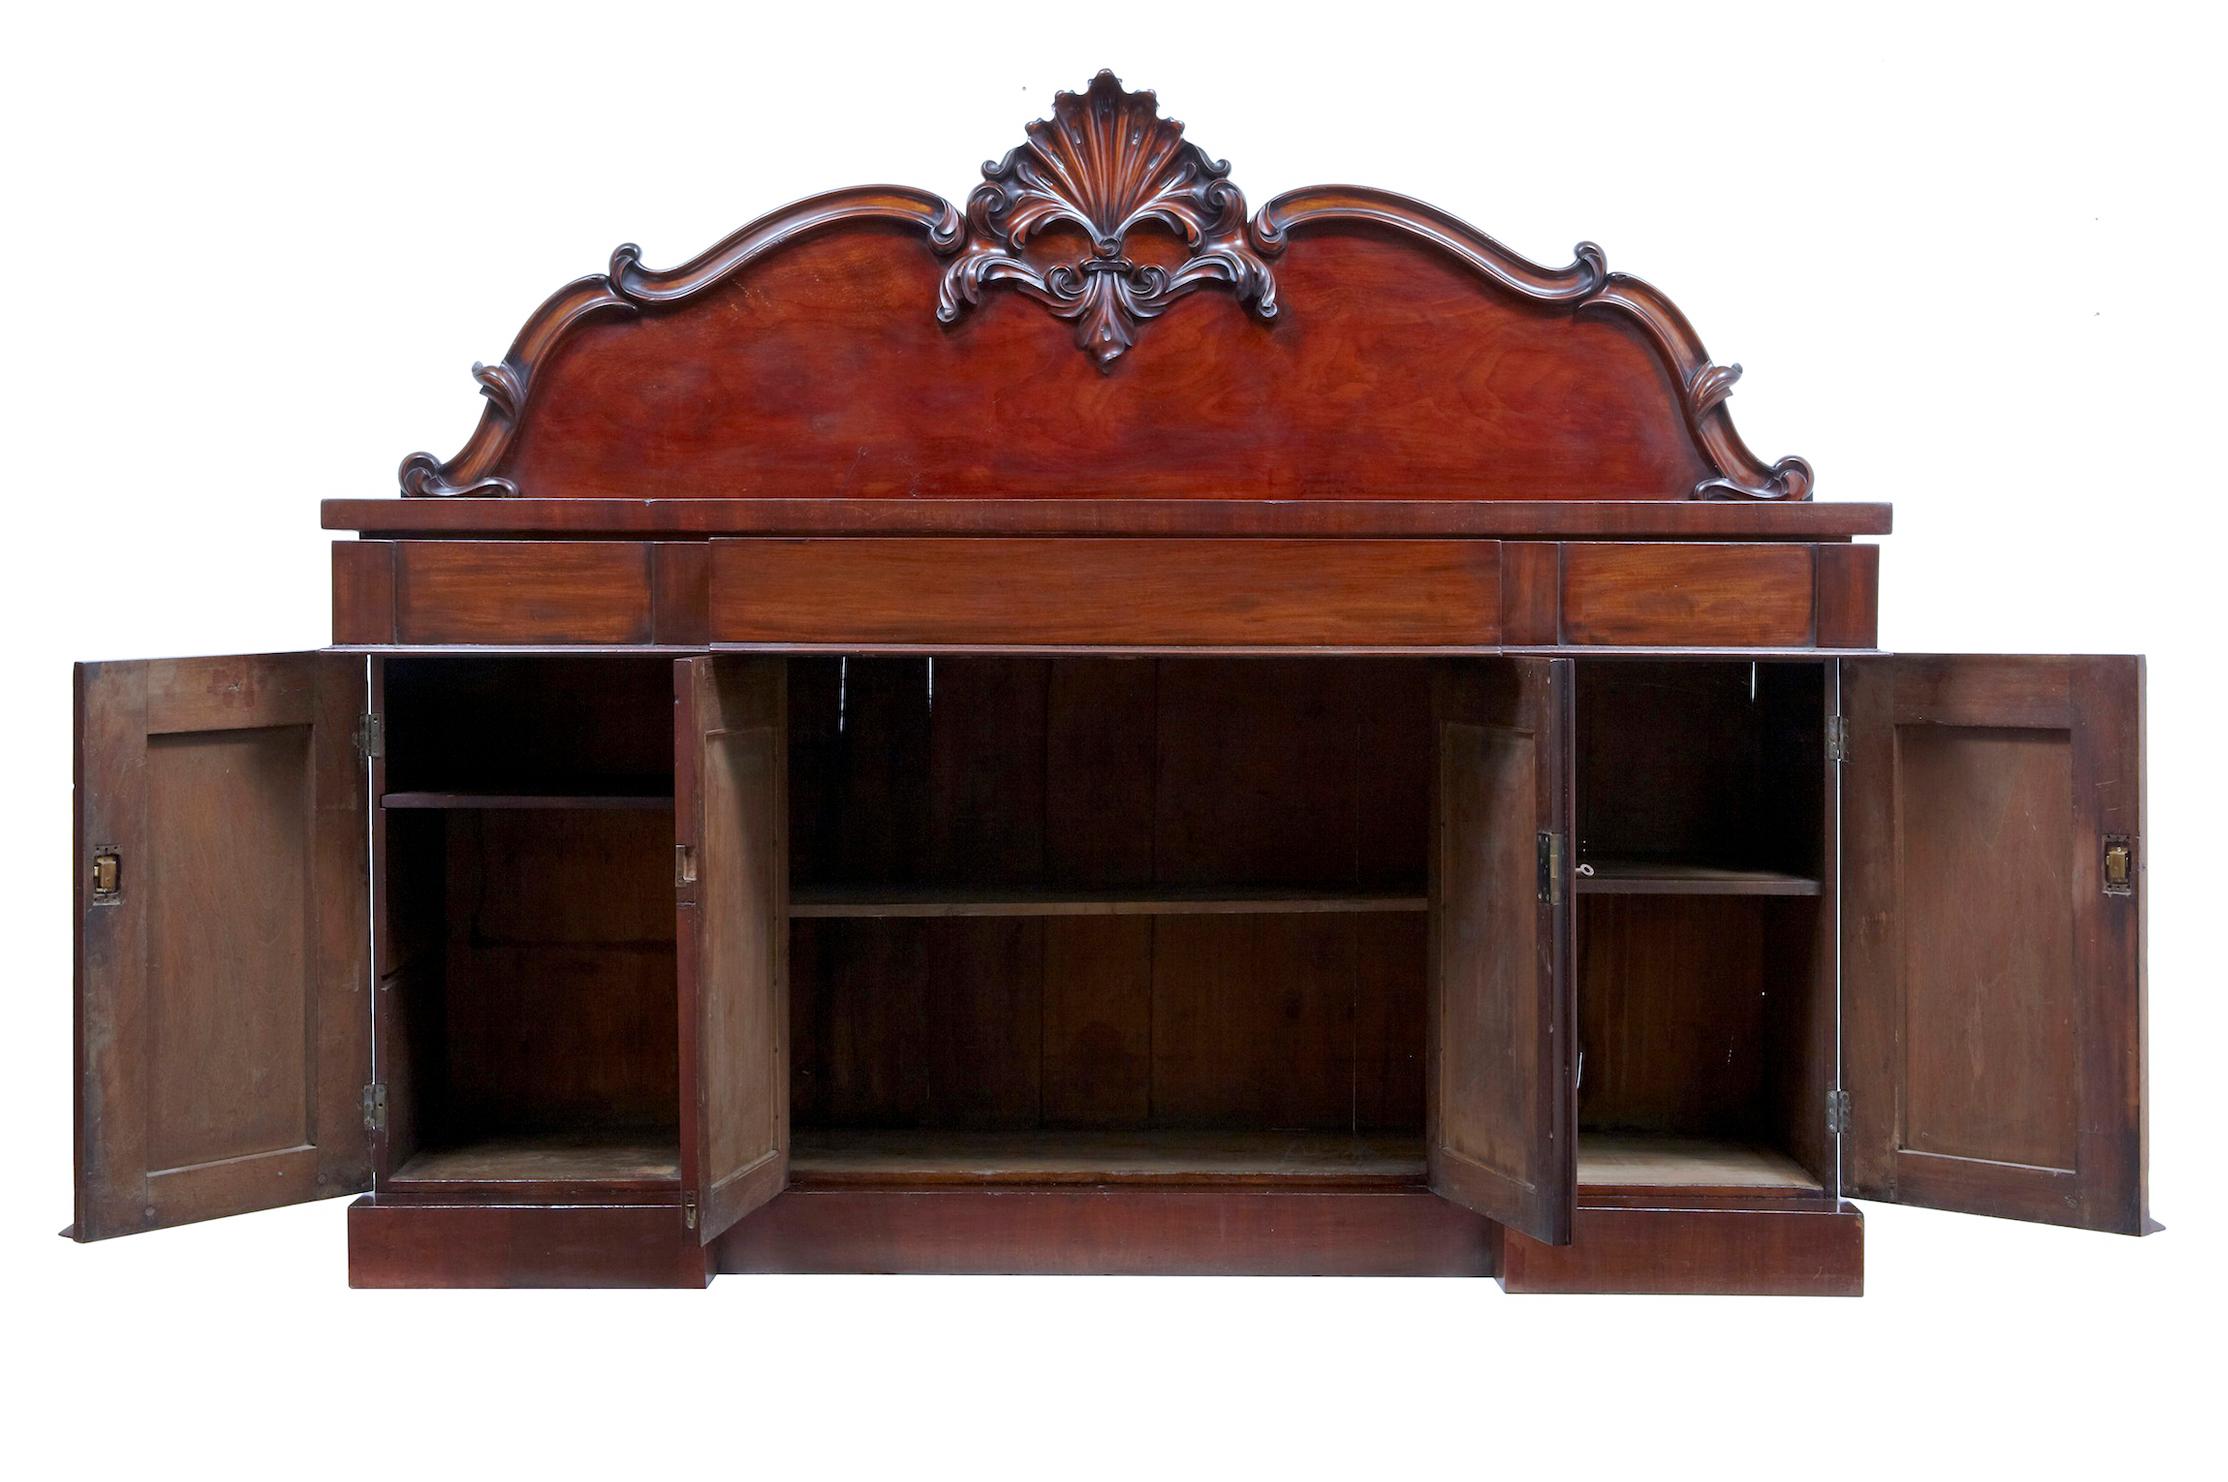 19th century william iv carved mahogany sideboard circa 1835

Good quality mahogany sideboard circa 1835. Lovely rich color. Main feature is the deeply carved stylized floral/shell central carving. 2 parts. 3 drawers above a double door cupboard